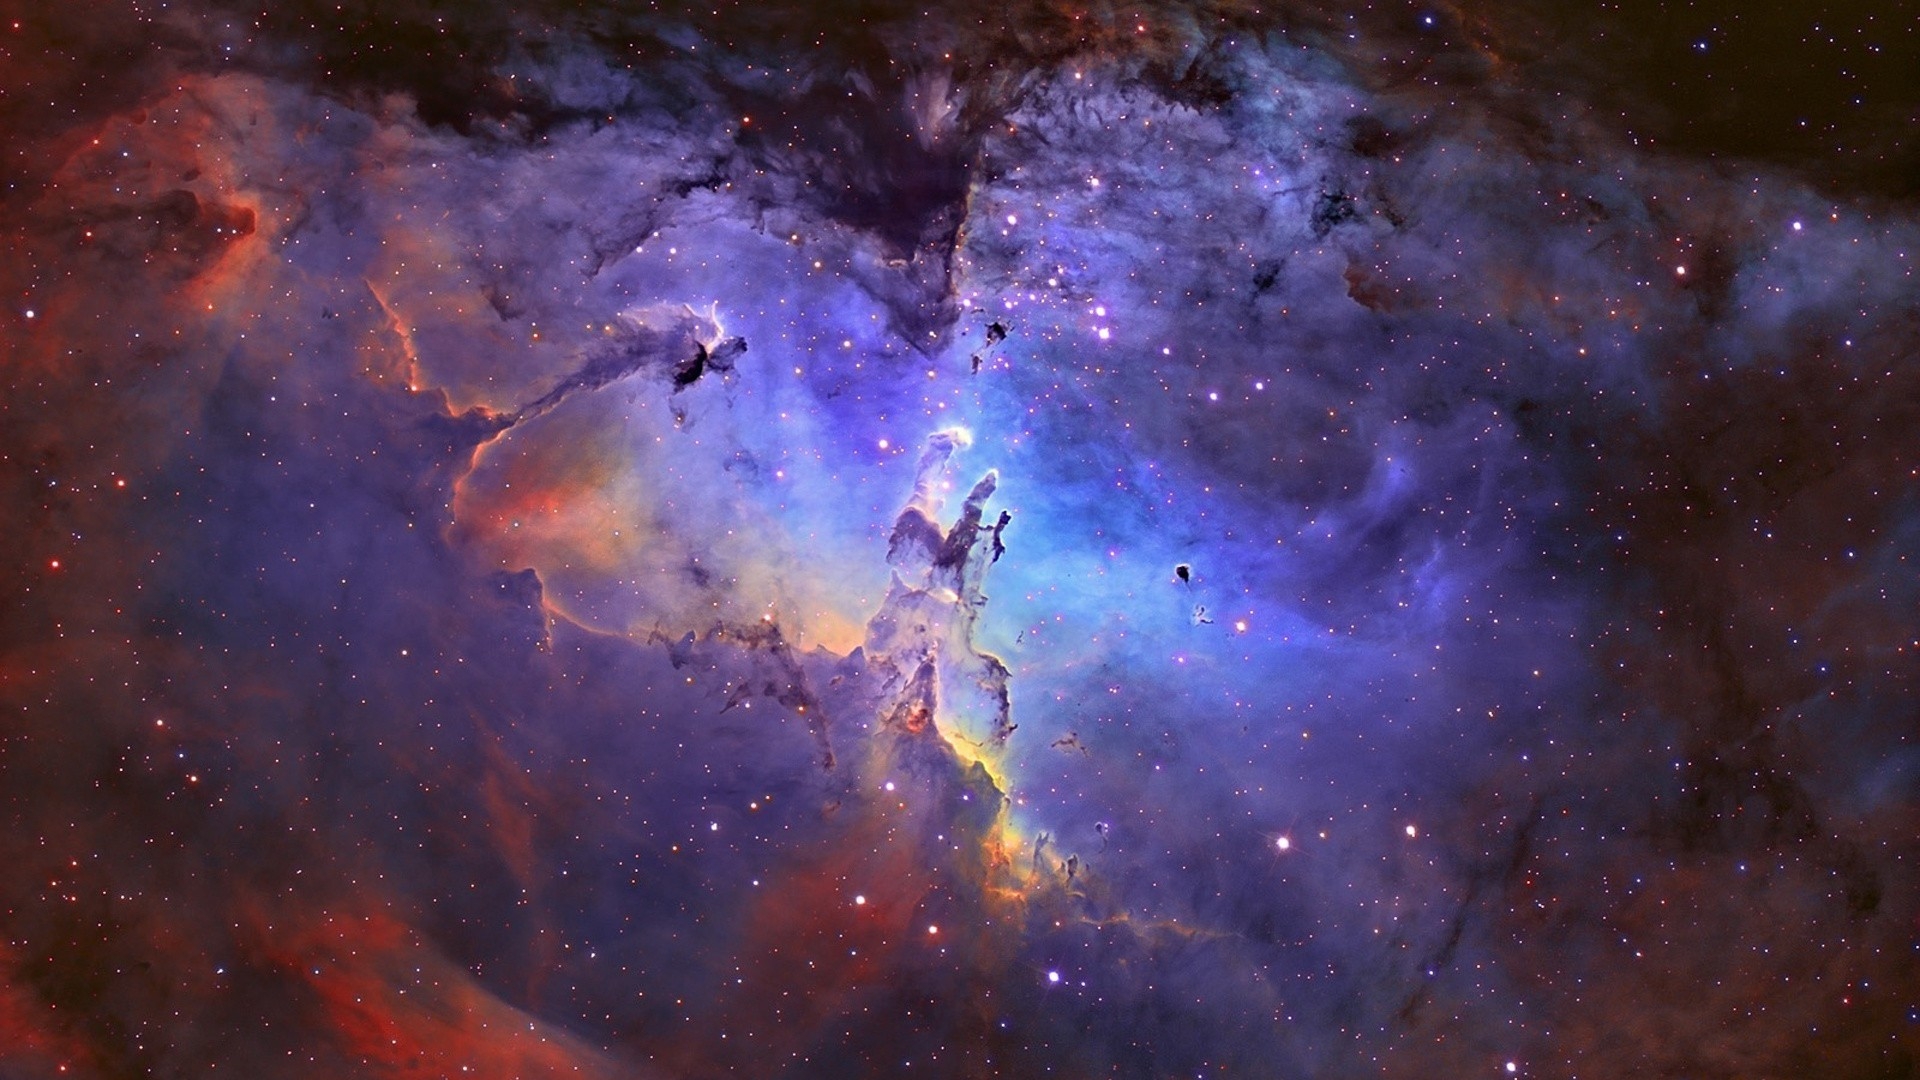 Outer space eagle nebula wallpaper 1920x1080 7326 WallpaperUP